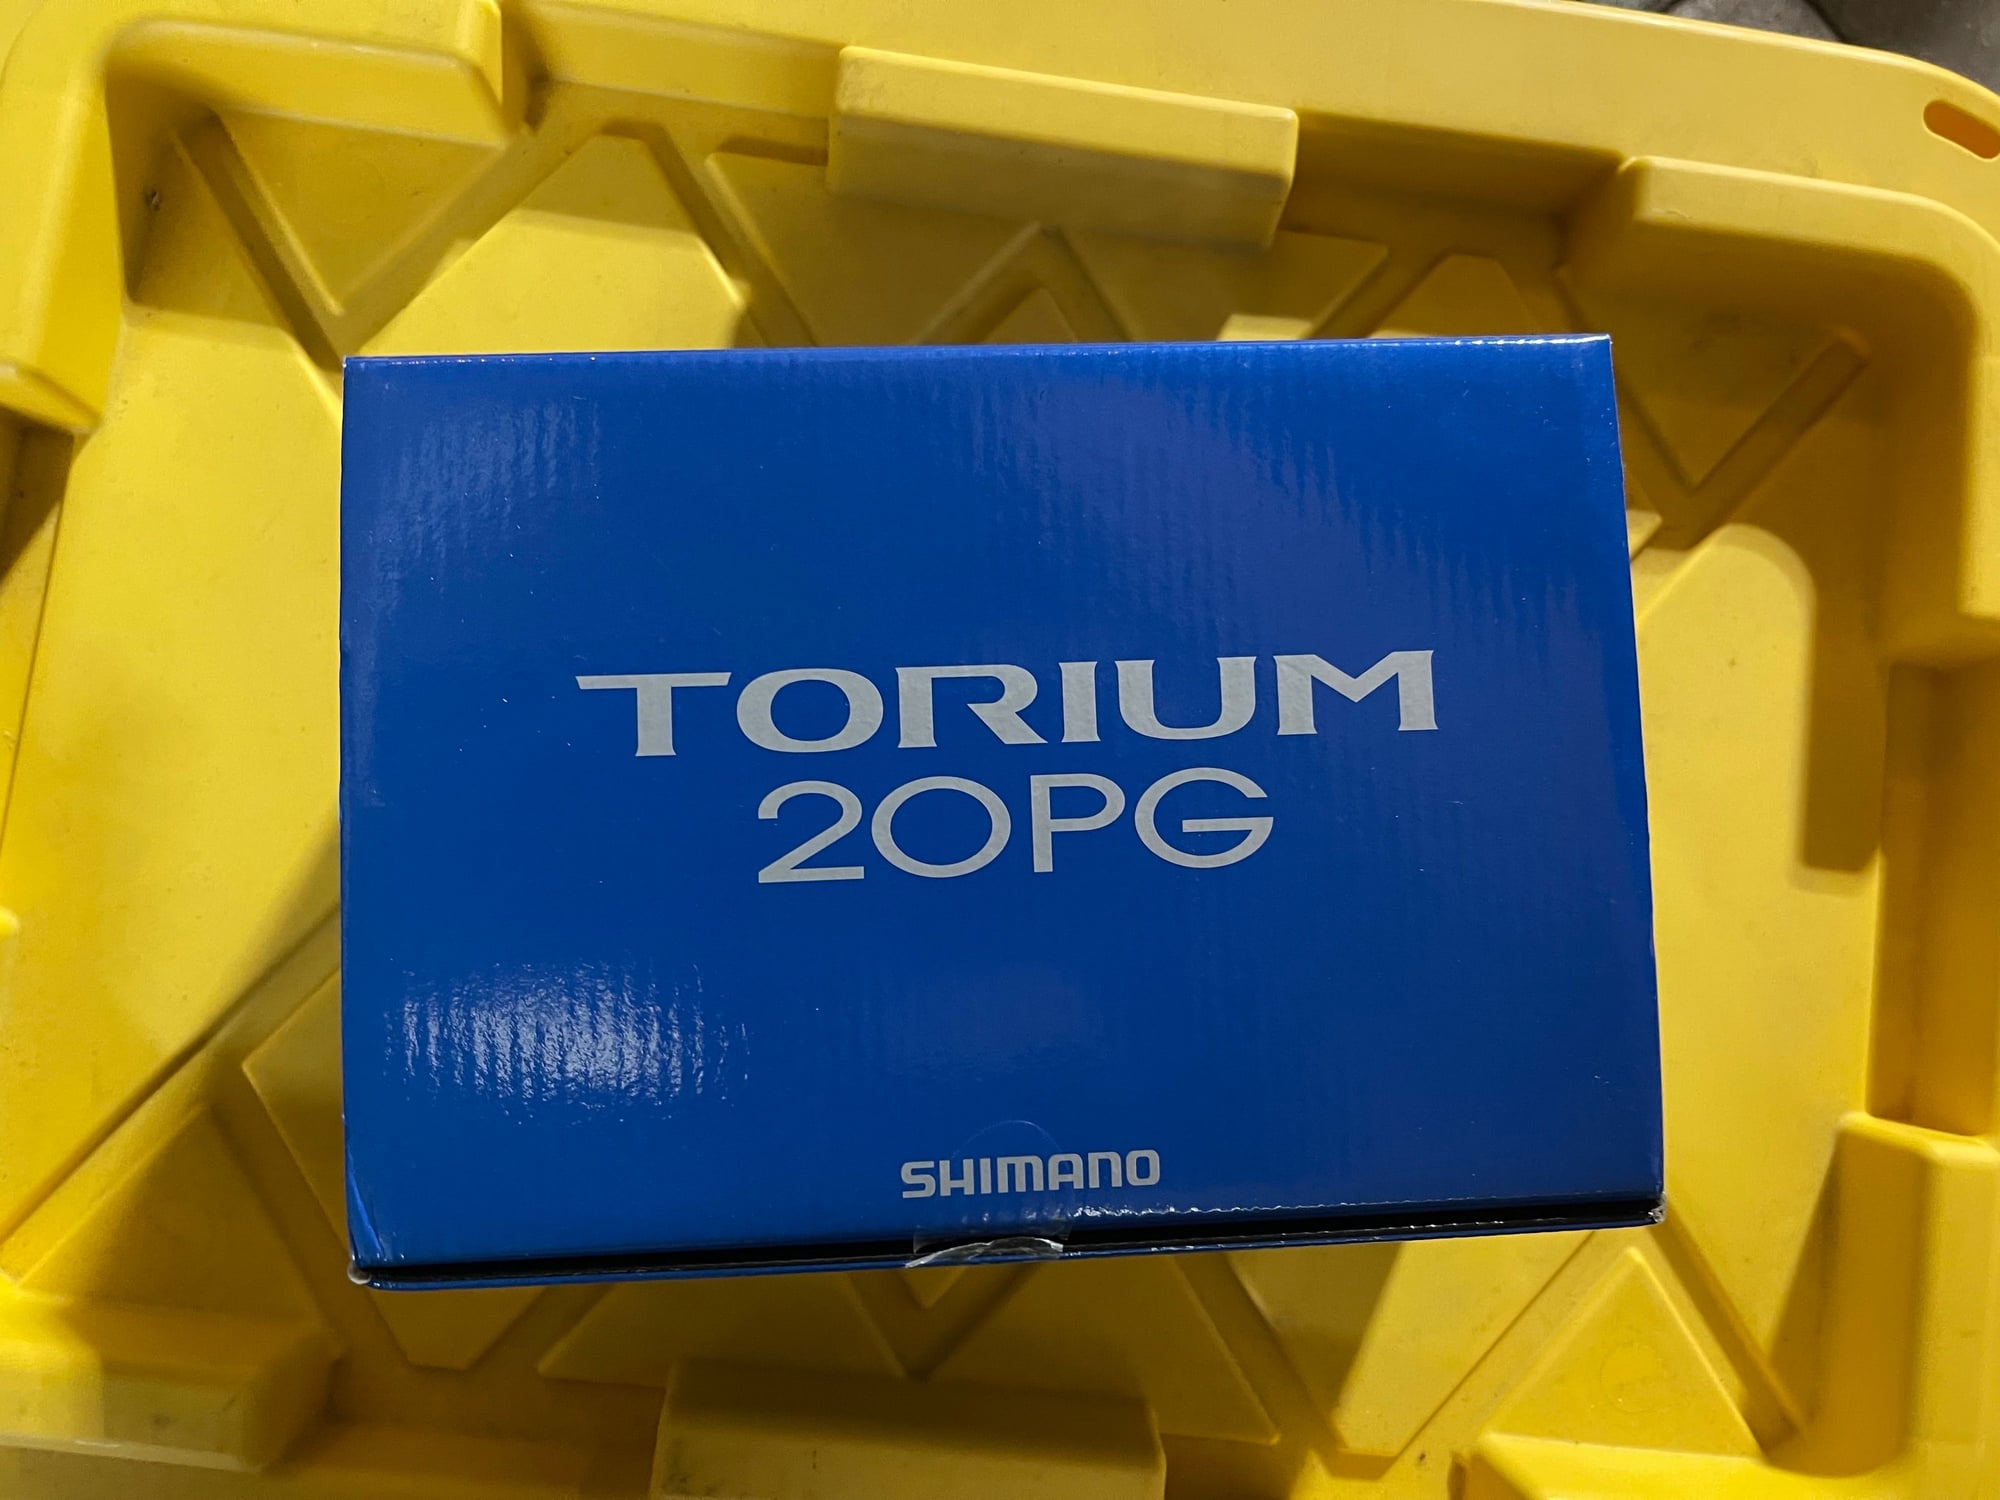 Shimano Torium 20 PG Brand New In Box + Reel Cover - The Hull Truth -  Boating and Fishing Forum